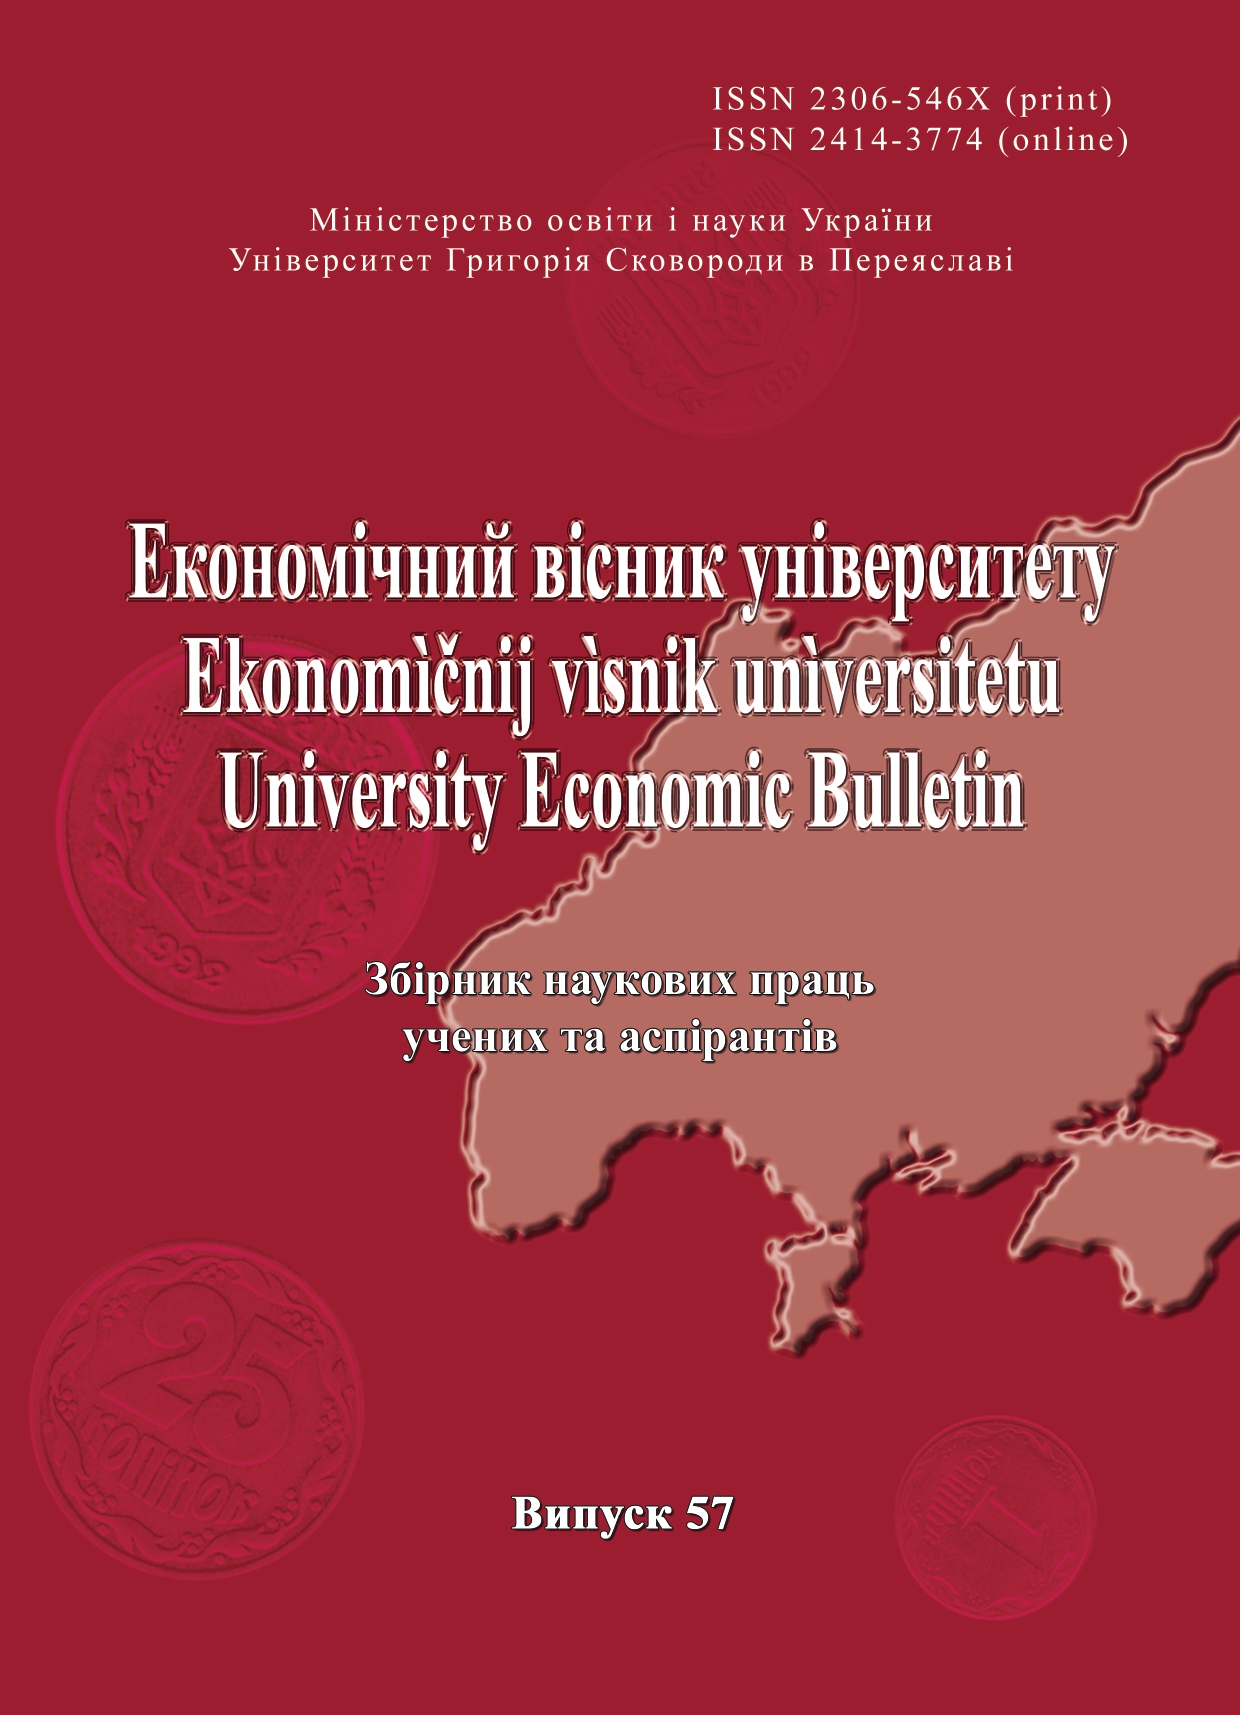 Tendencies and strategy for sustainable development: Lithuania-Ukraine Cover Image